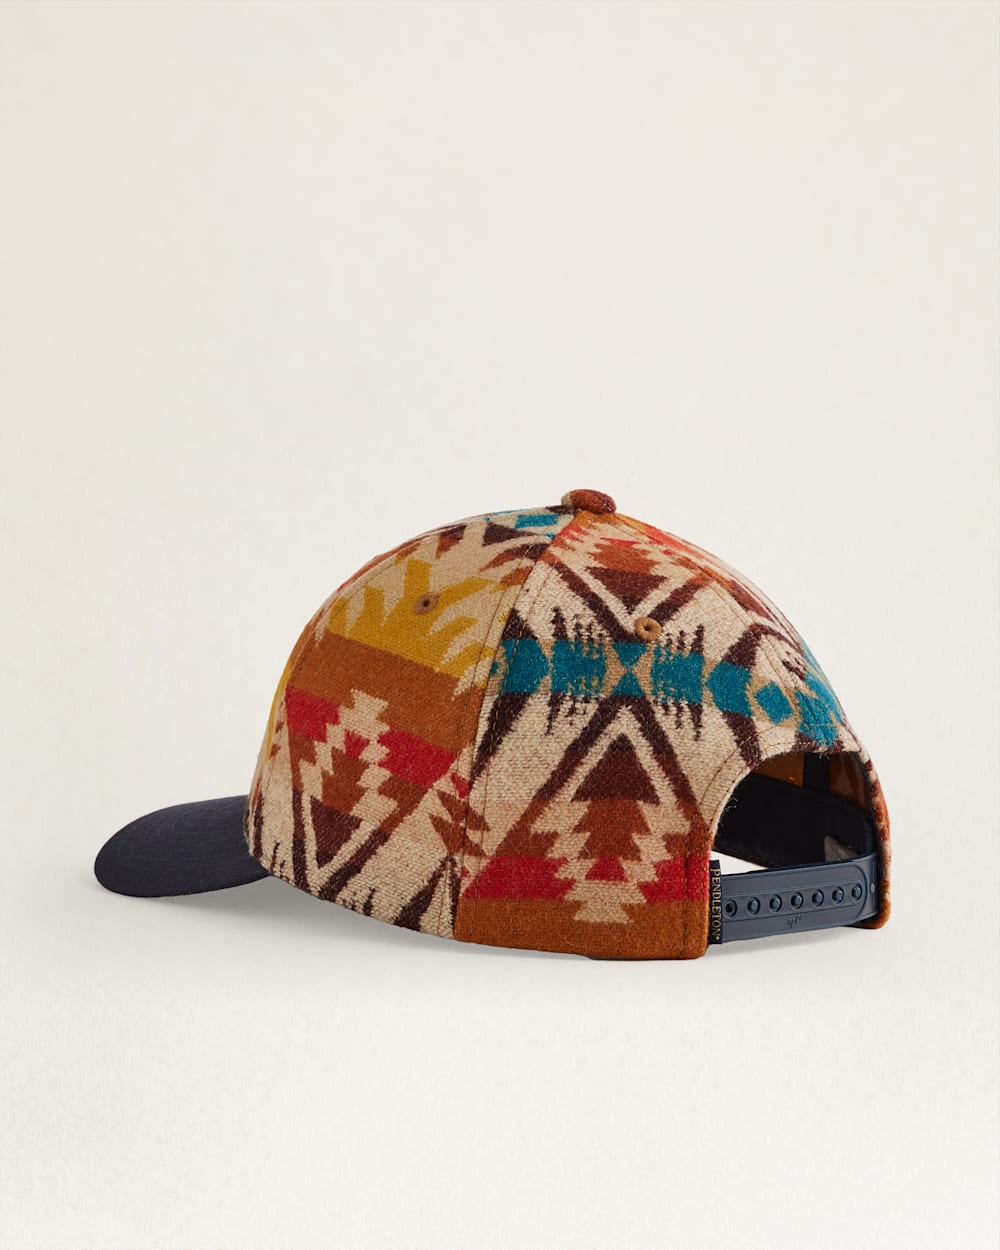 ALTERNATE VIEW OF PASCO WOOL HAT IN SUNSET MULTI image number 3